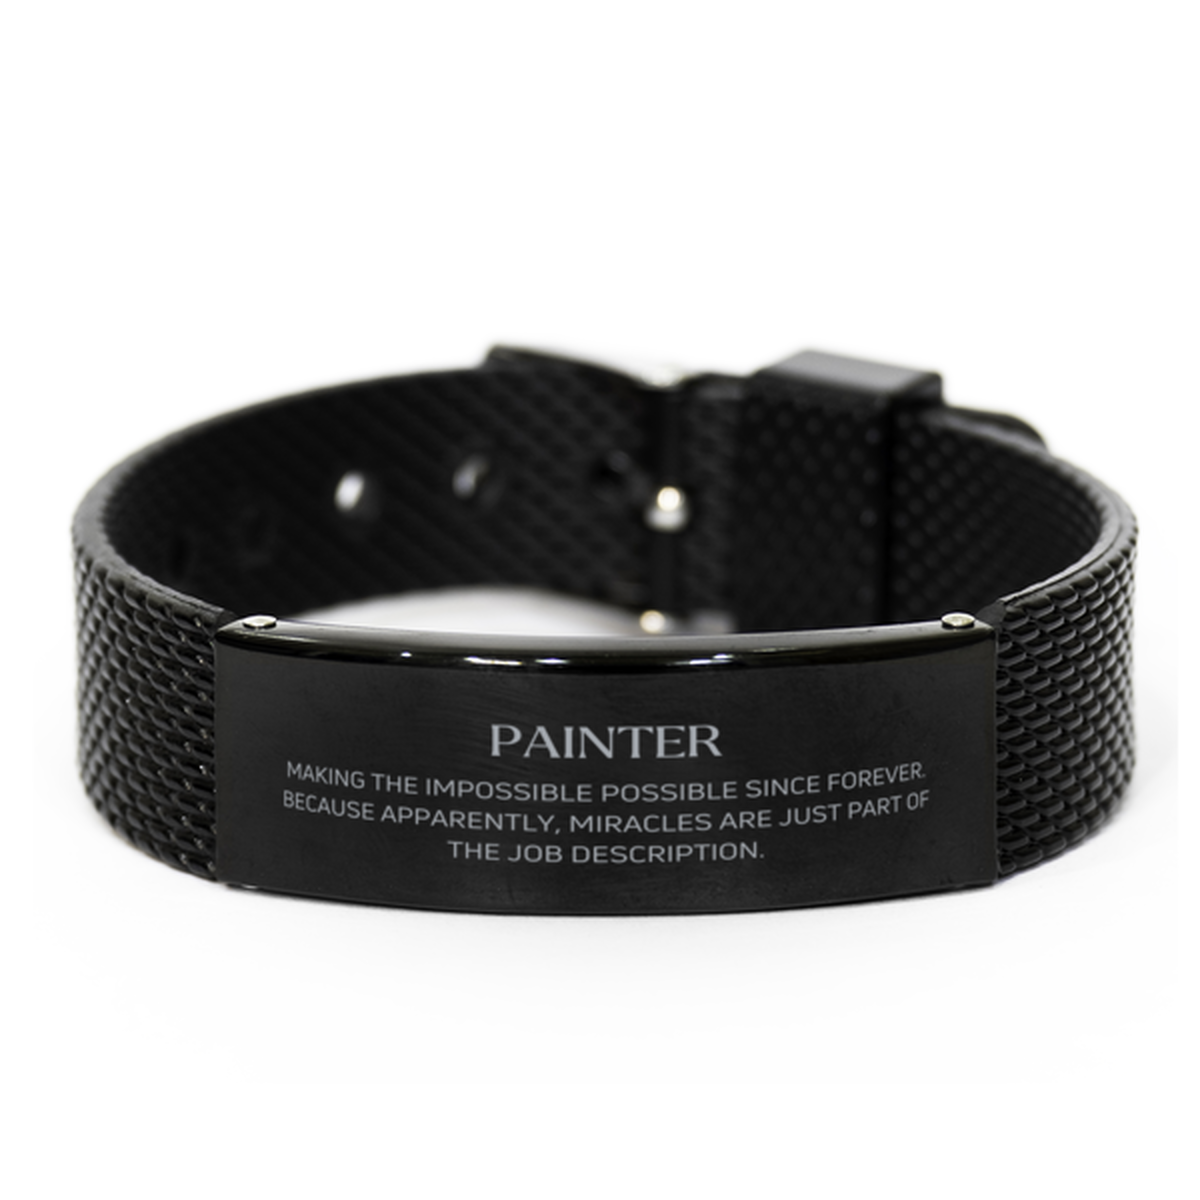 Funny Painter Gifts, Miracles are just part of the job description, Inspirational Birthday Black Shark Mesh Bracelet For Painter, Men, Women, Coworkers, Friends, Boss